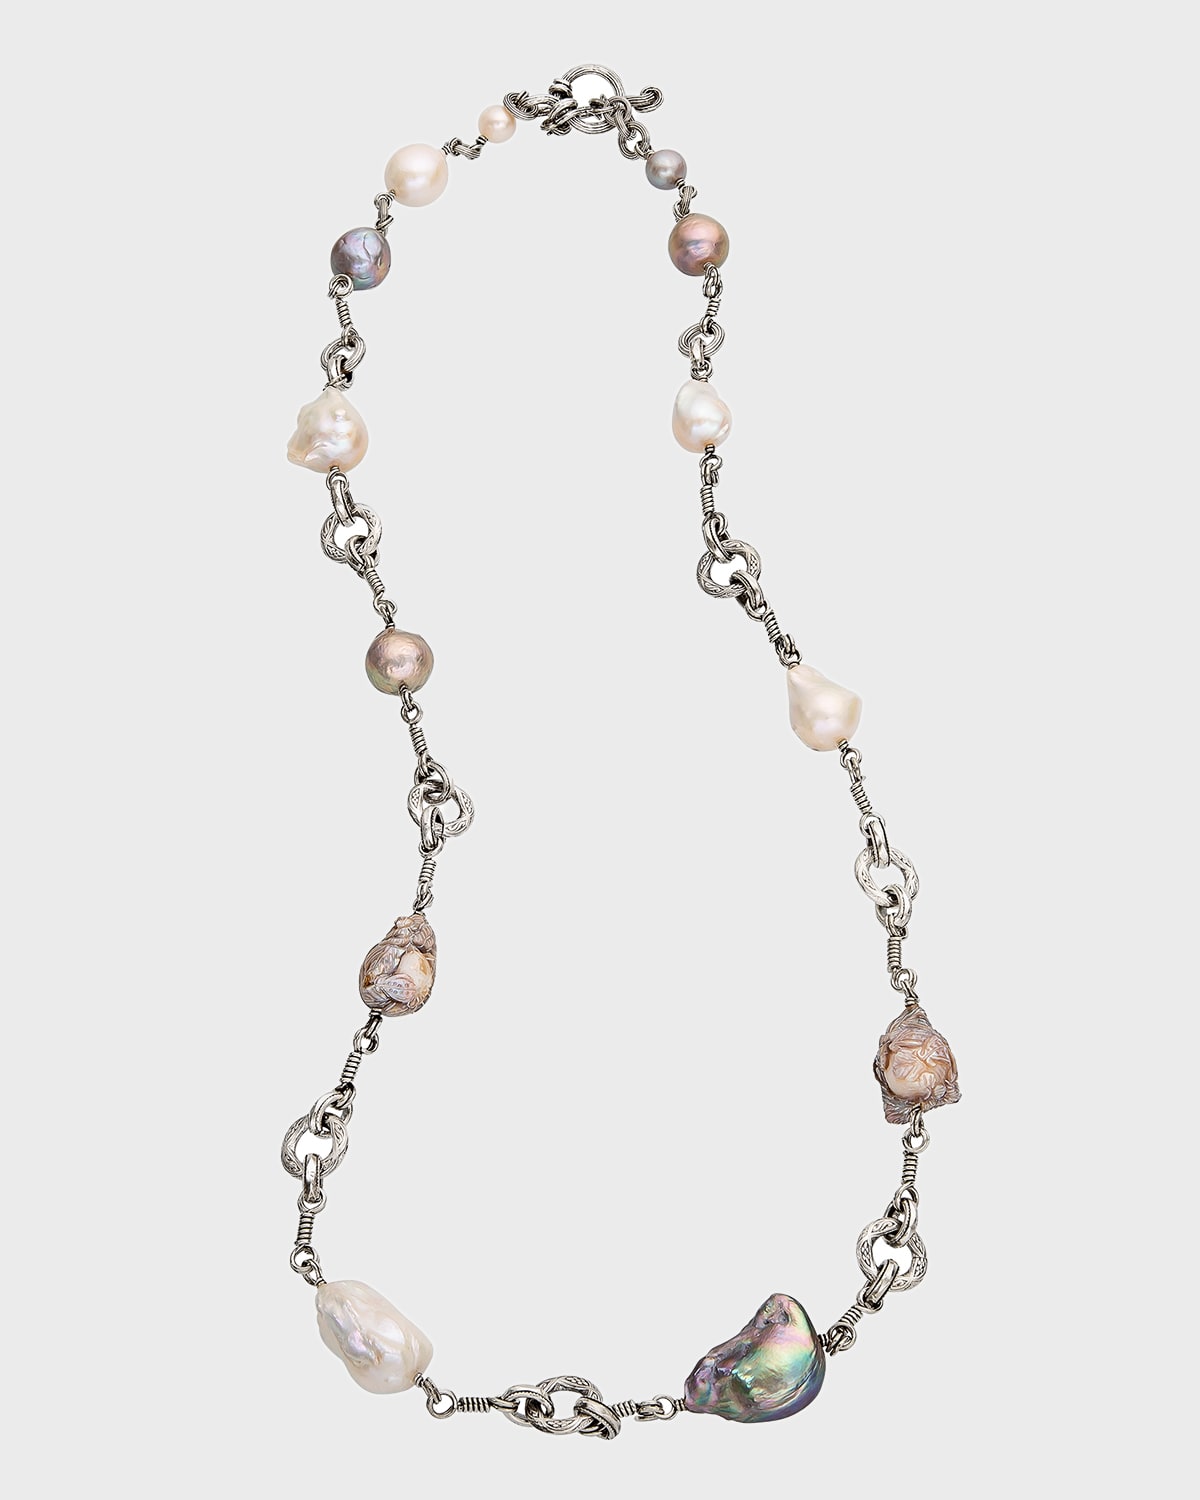 Hand-Carved Baroque Multihued Pearl Necklace in Sterling Silver